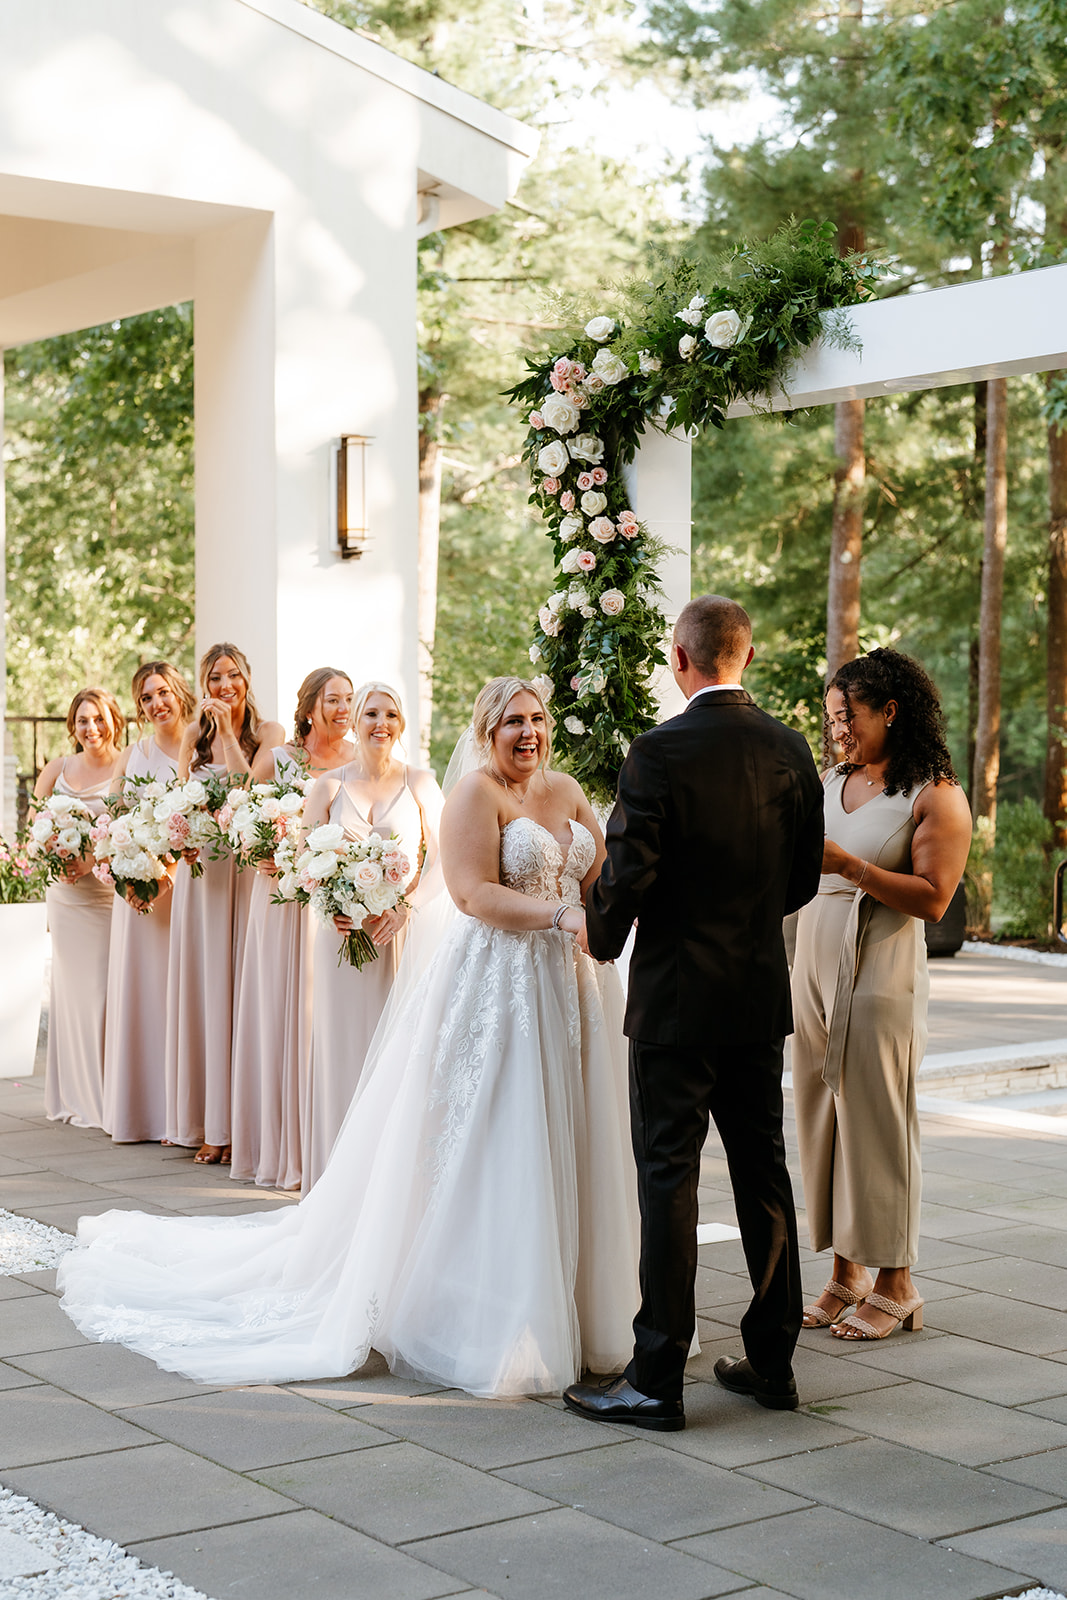 A bride and groom hold hands at an outdoor wedding ceremony while surrounded by their bridal party at Lakeview Pavilion.